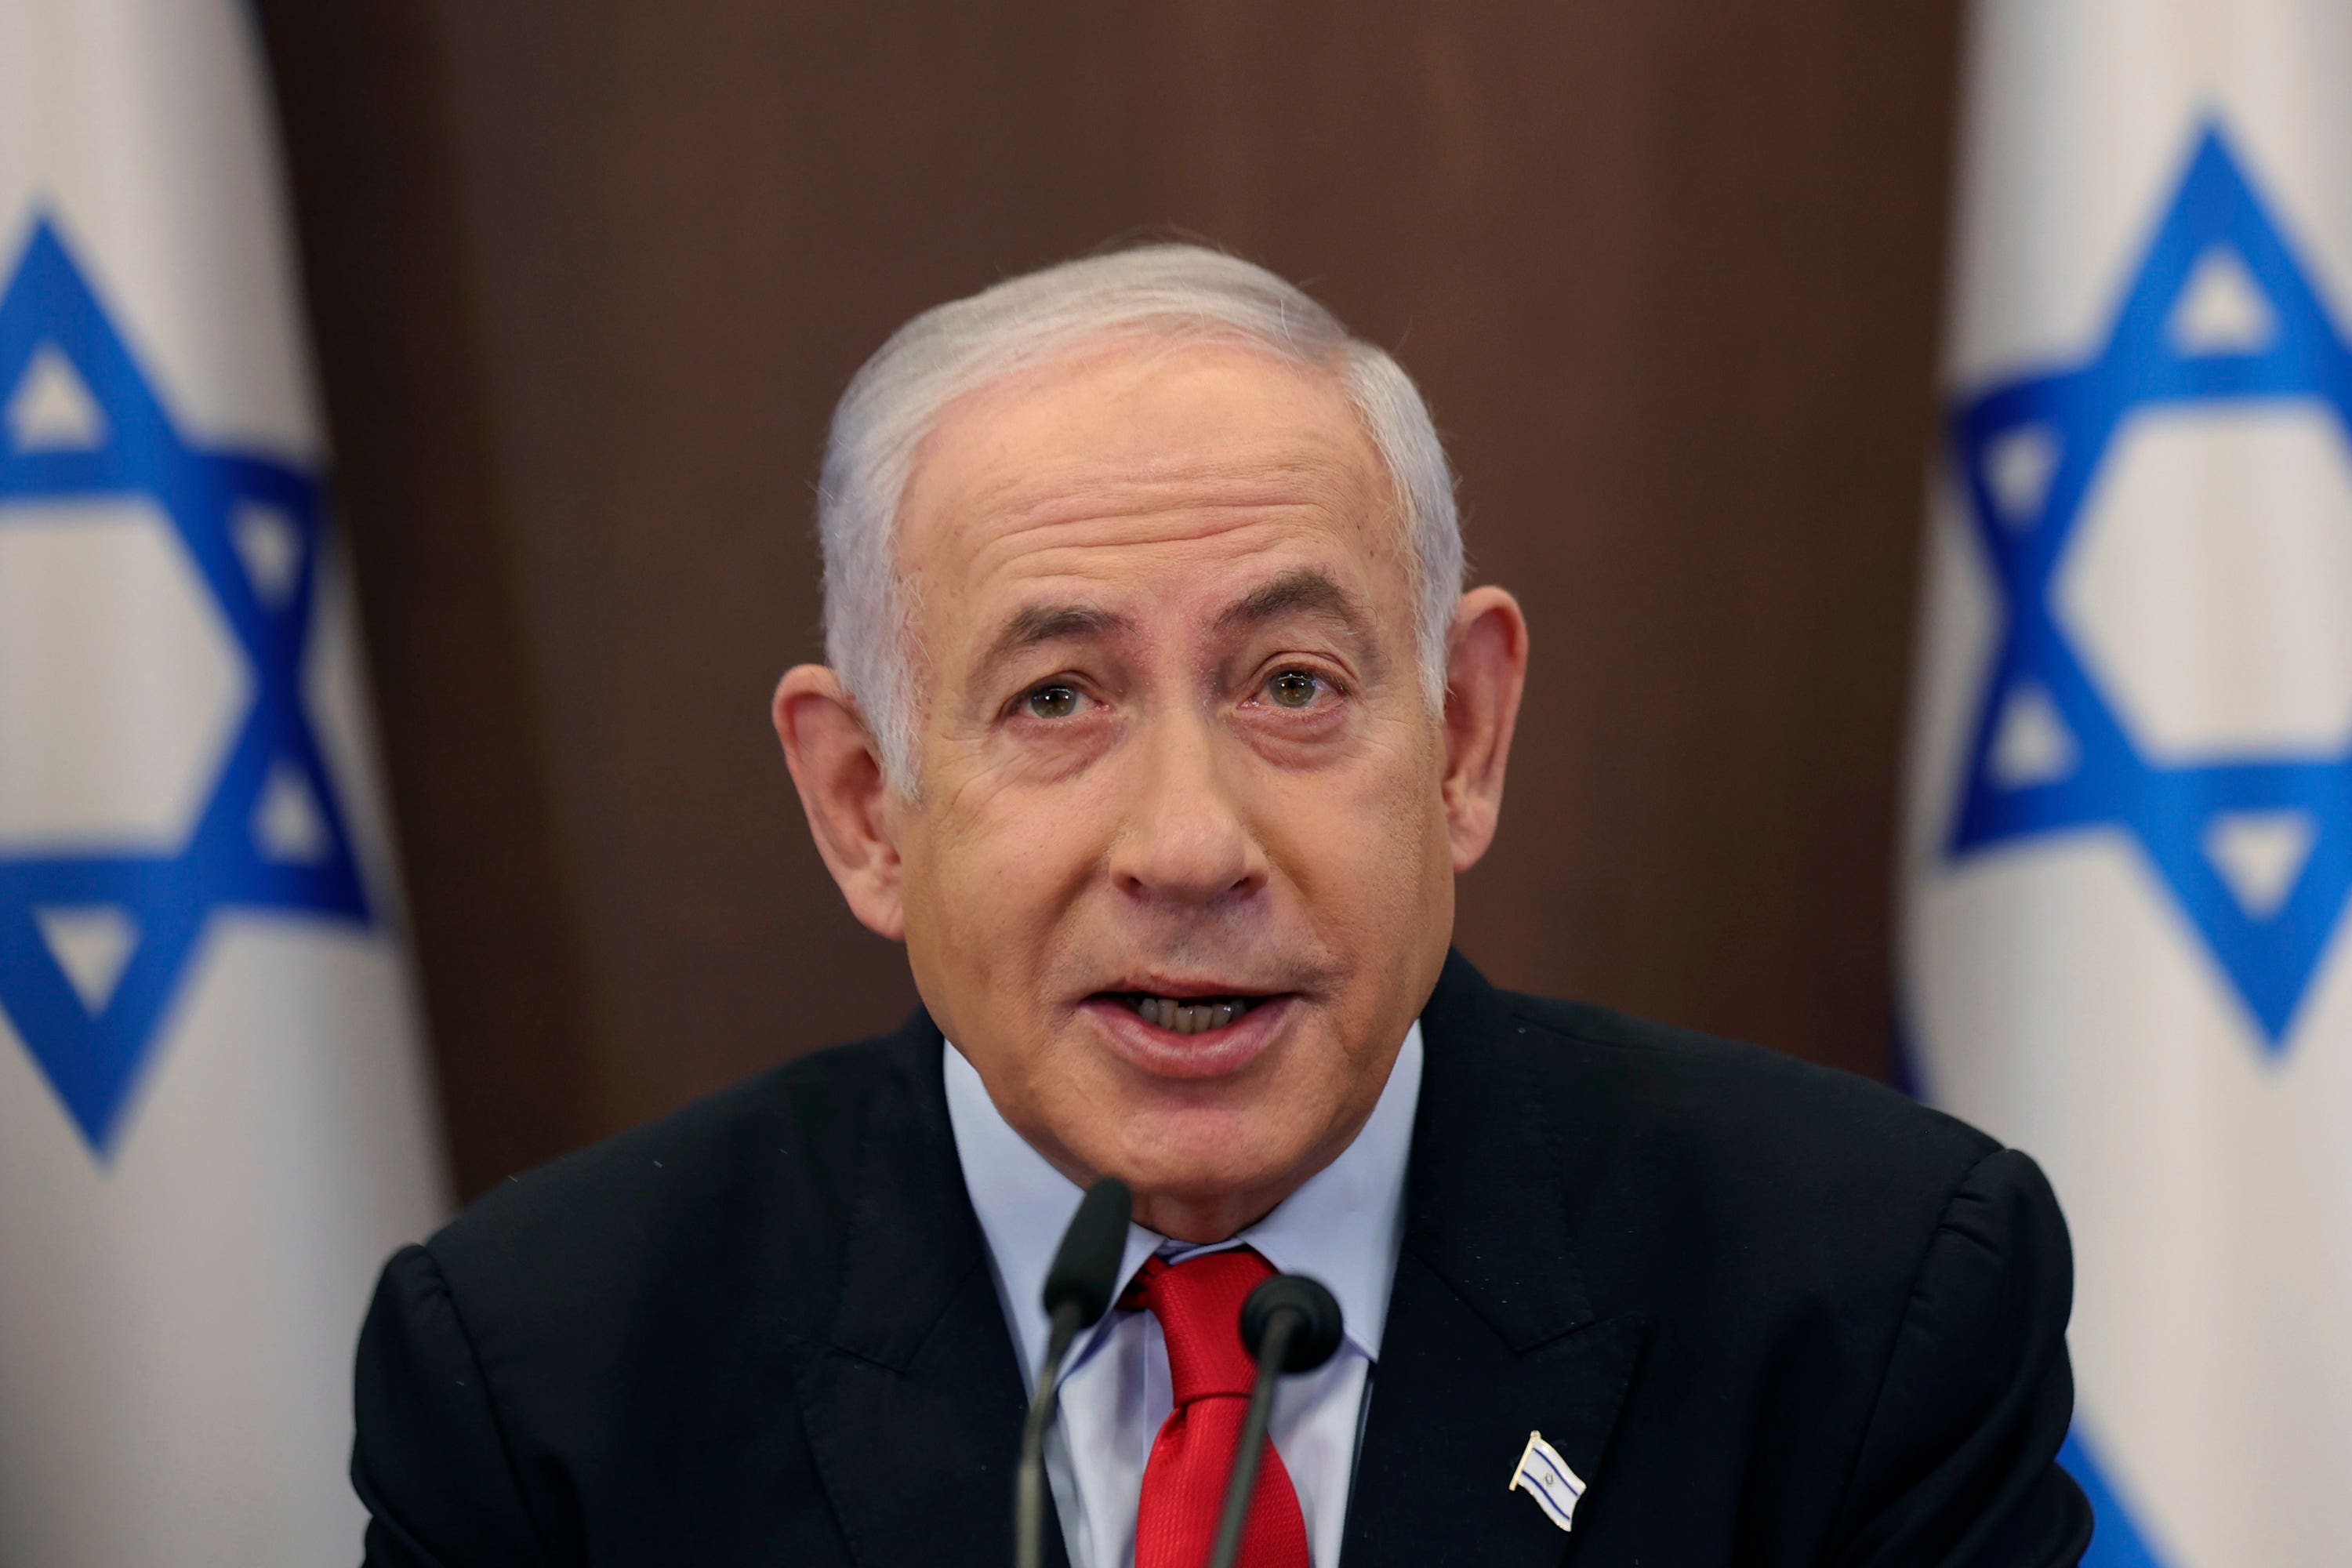 Israeli Prime Minister Benjamin Netanyahu ordered a call-up of reservists